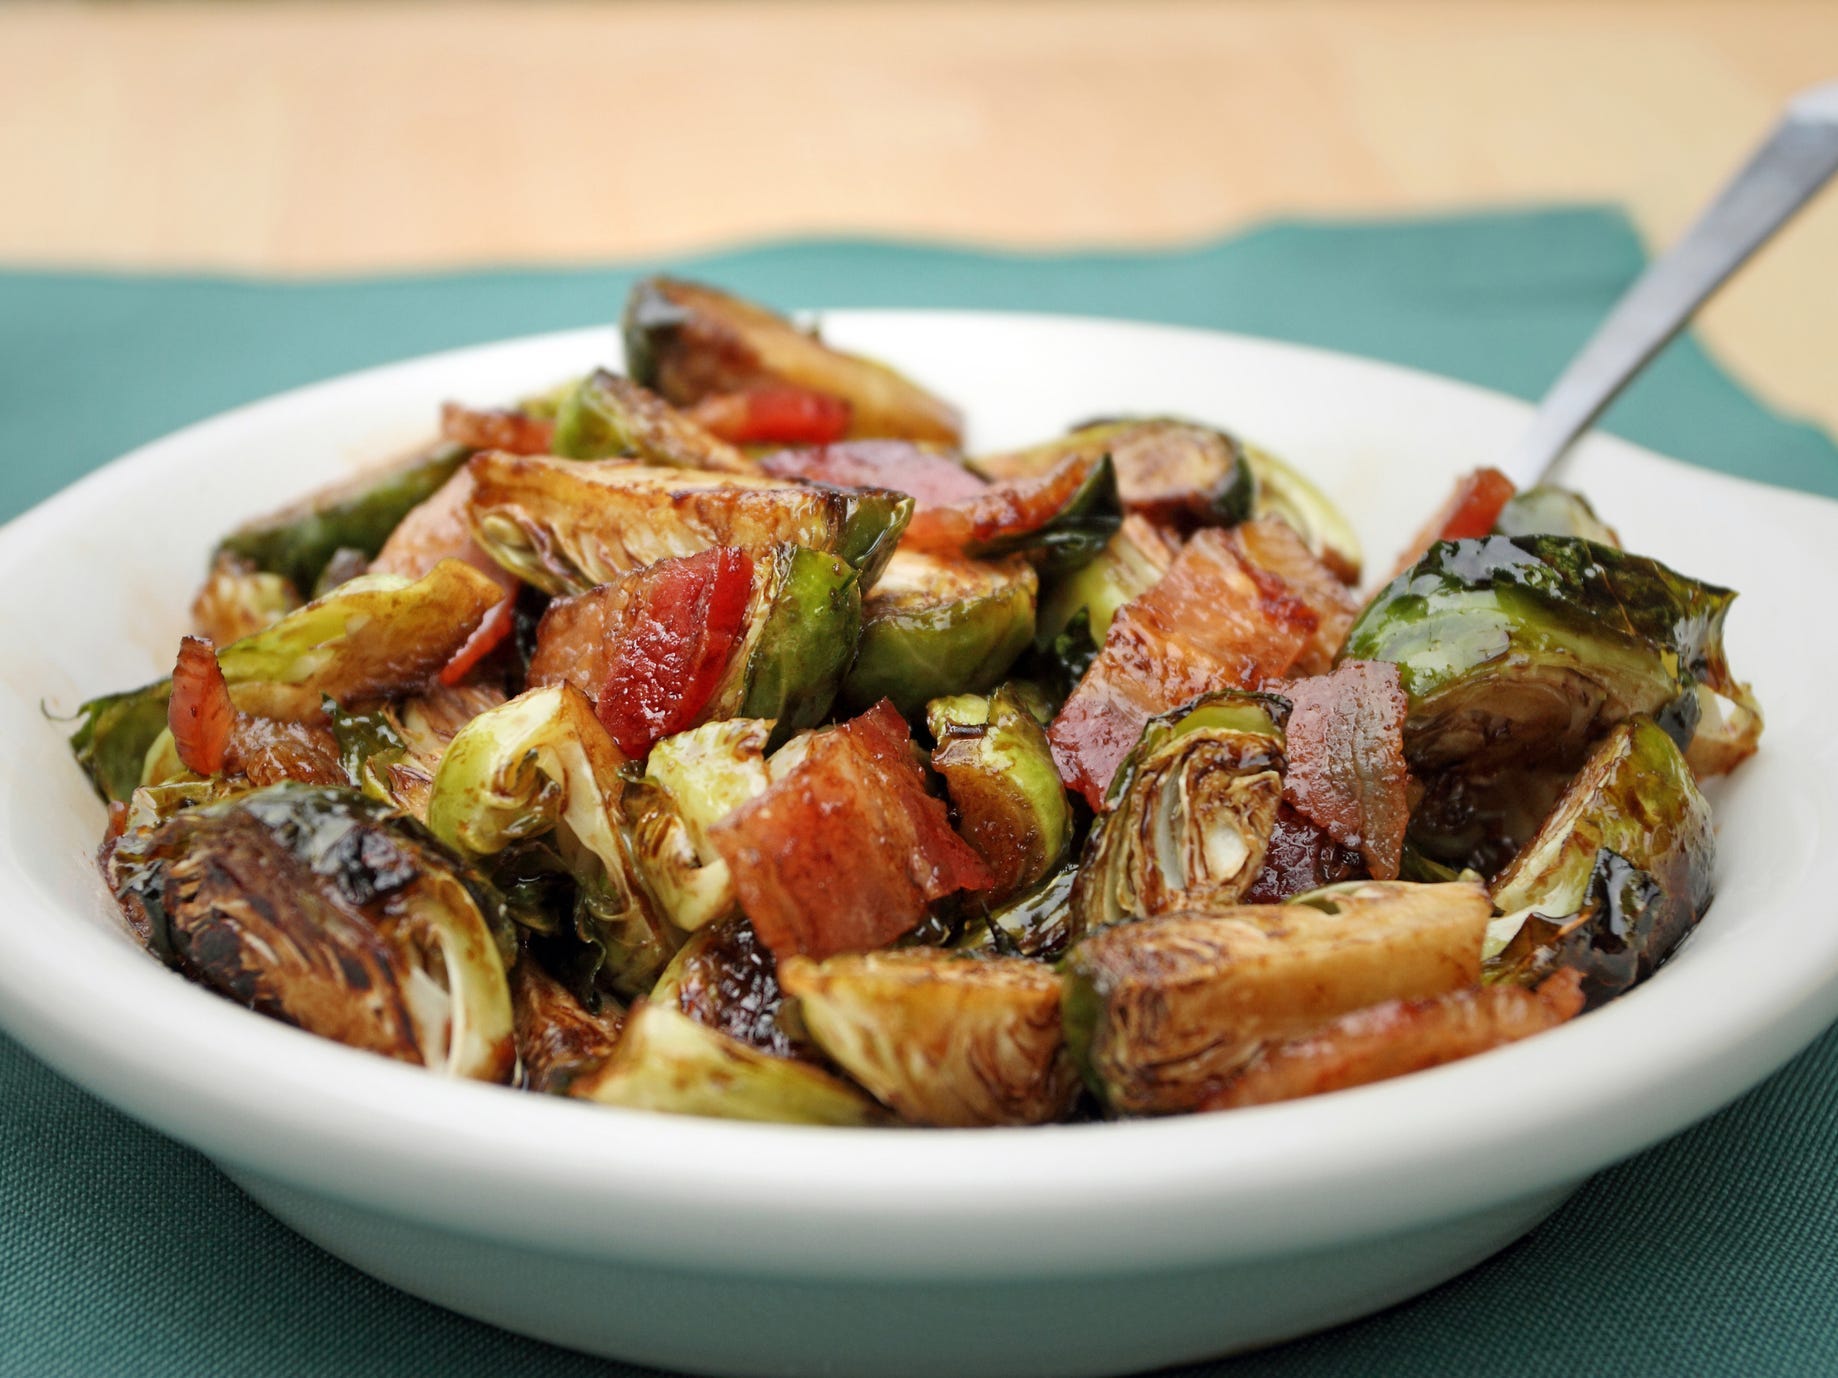 A bowl of charred Brussels sprouts studded with pieces of bacon